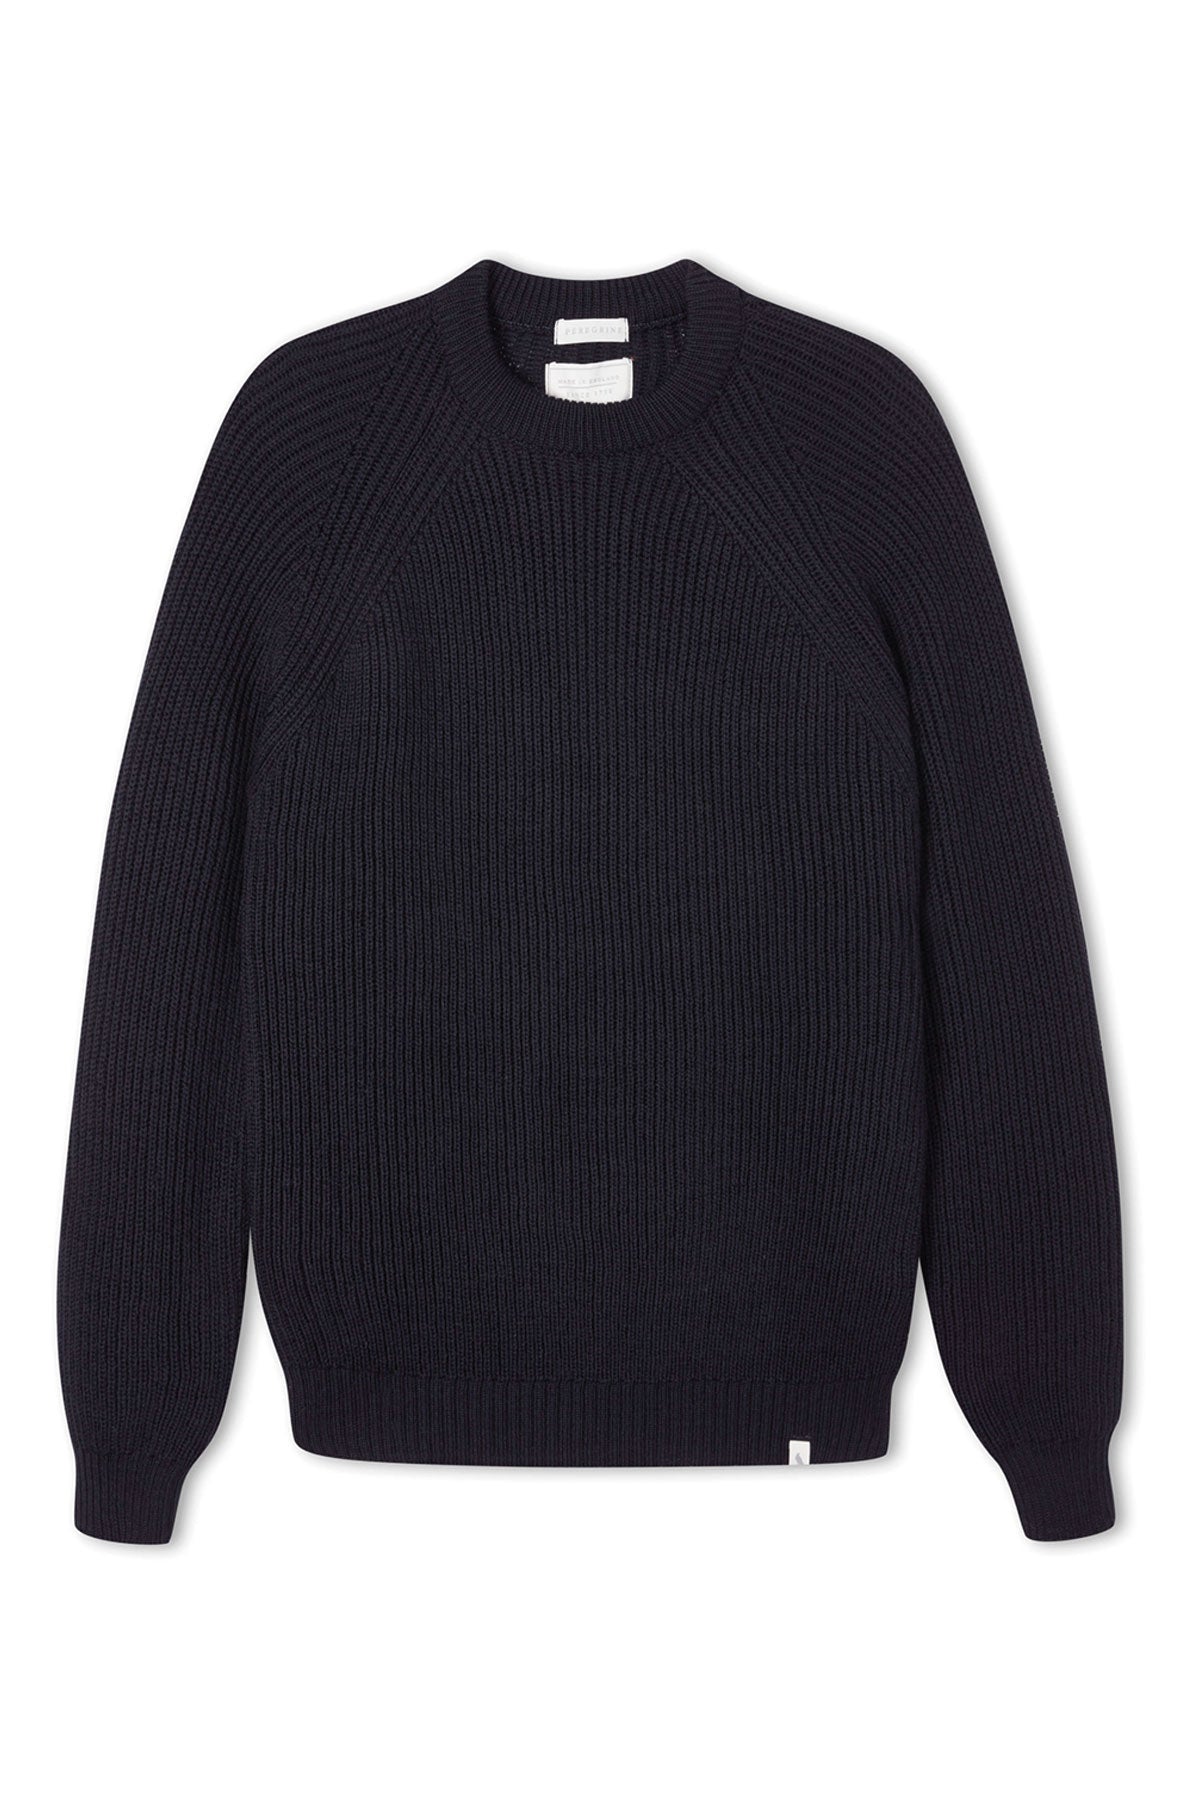 Peregrine - Ford Crew Jumper in Navy – The Rugged Society